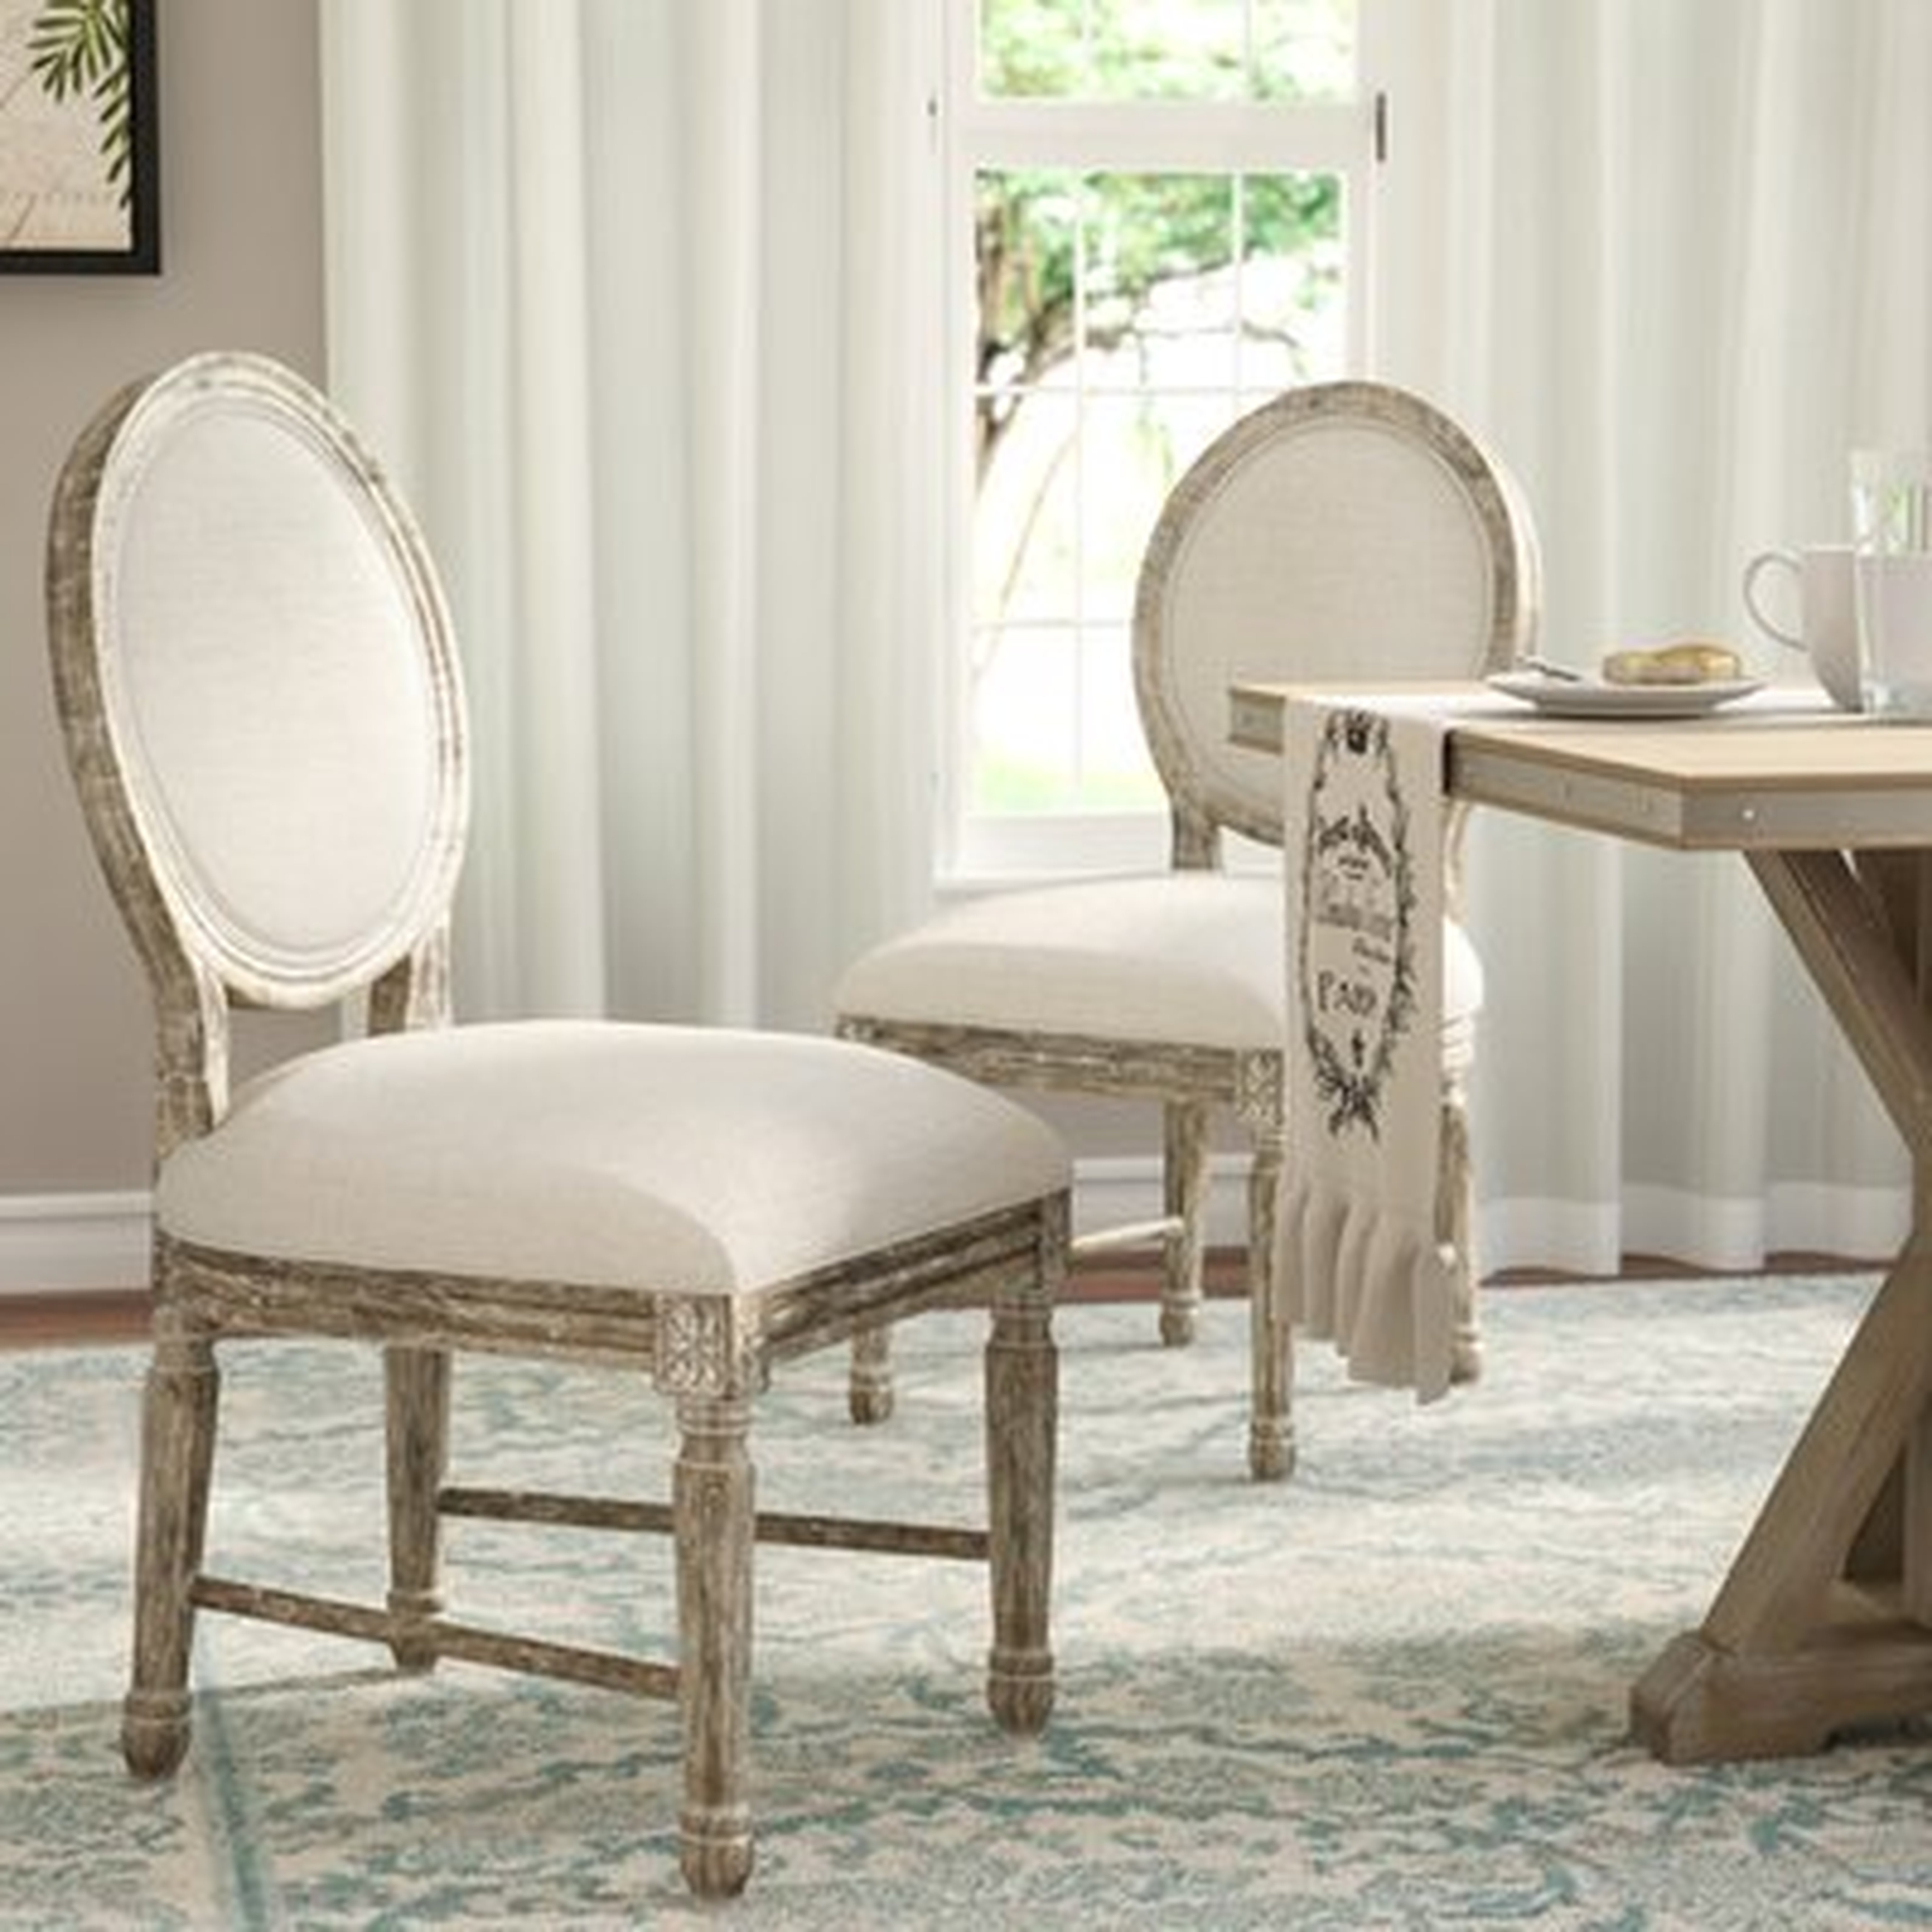 Clintwood Side Chair in Natural Beige - Wayfair